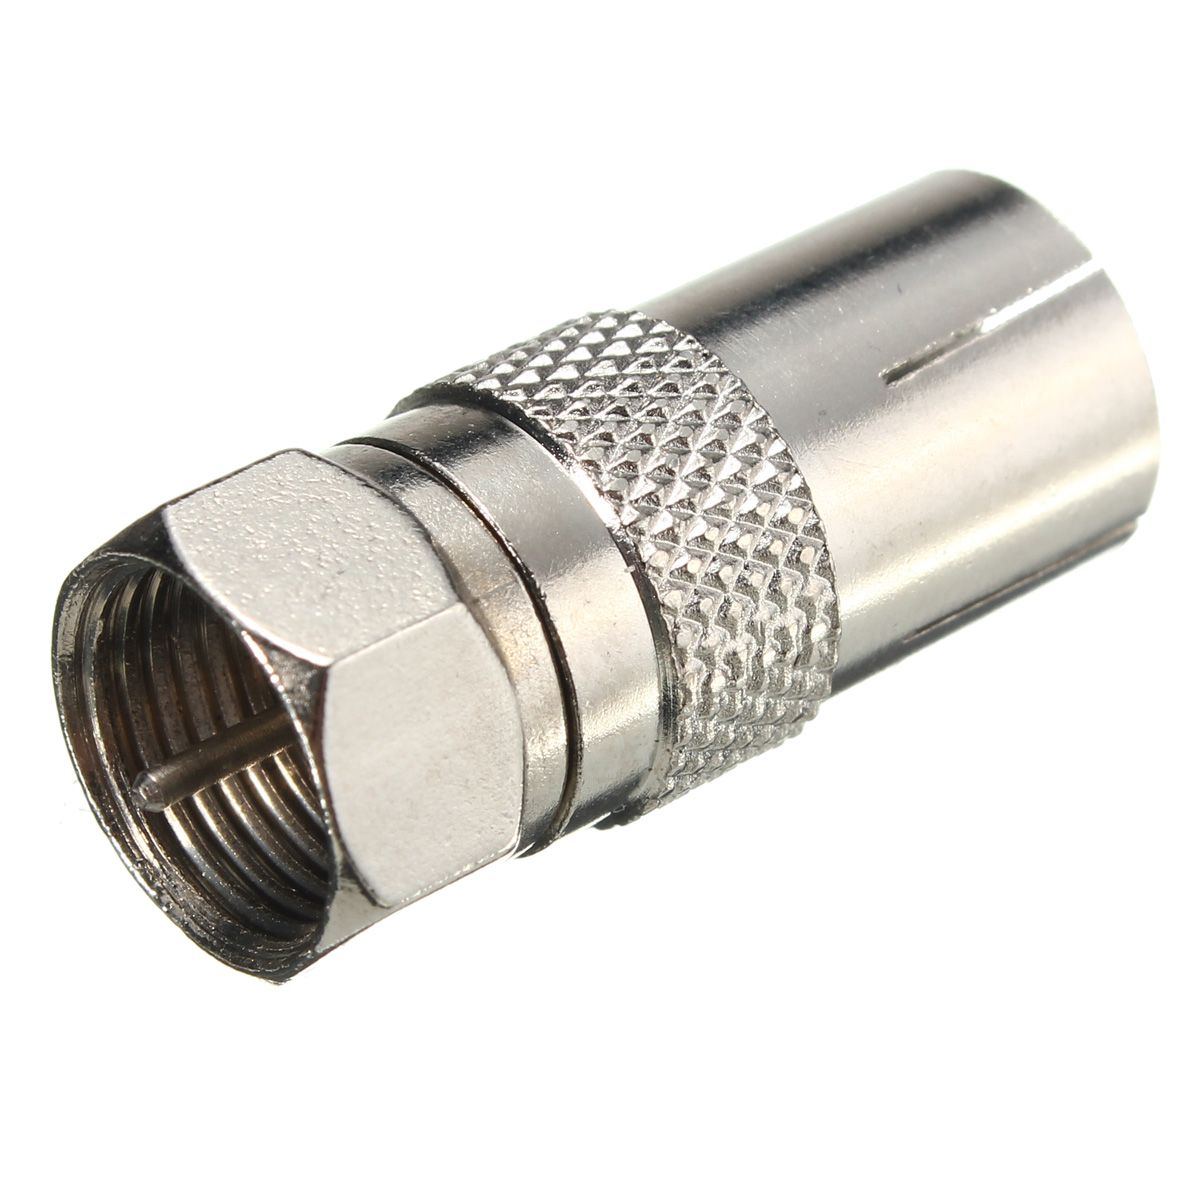 Aerial-Female-Socket-Adaptor-To-F-Type-Screw-Male-Plug-TV-RF-Coaxial-Connector-Converter-1023000